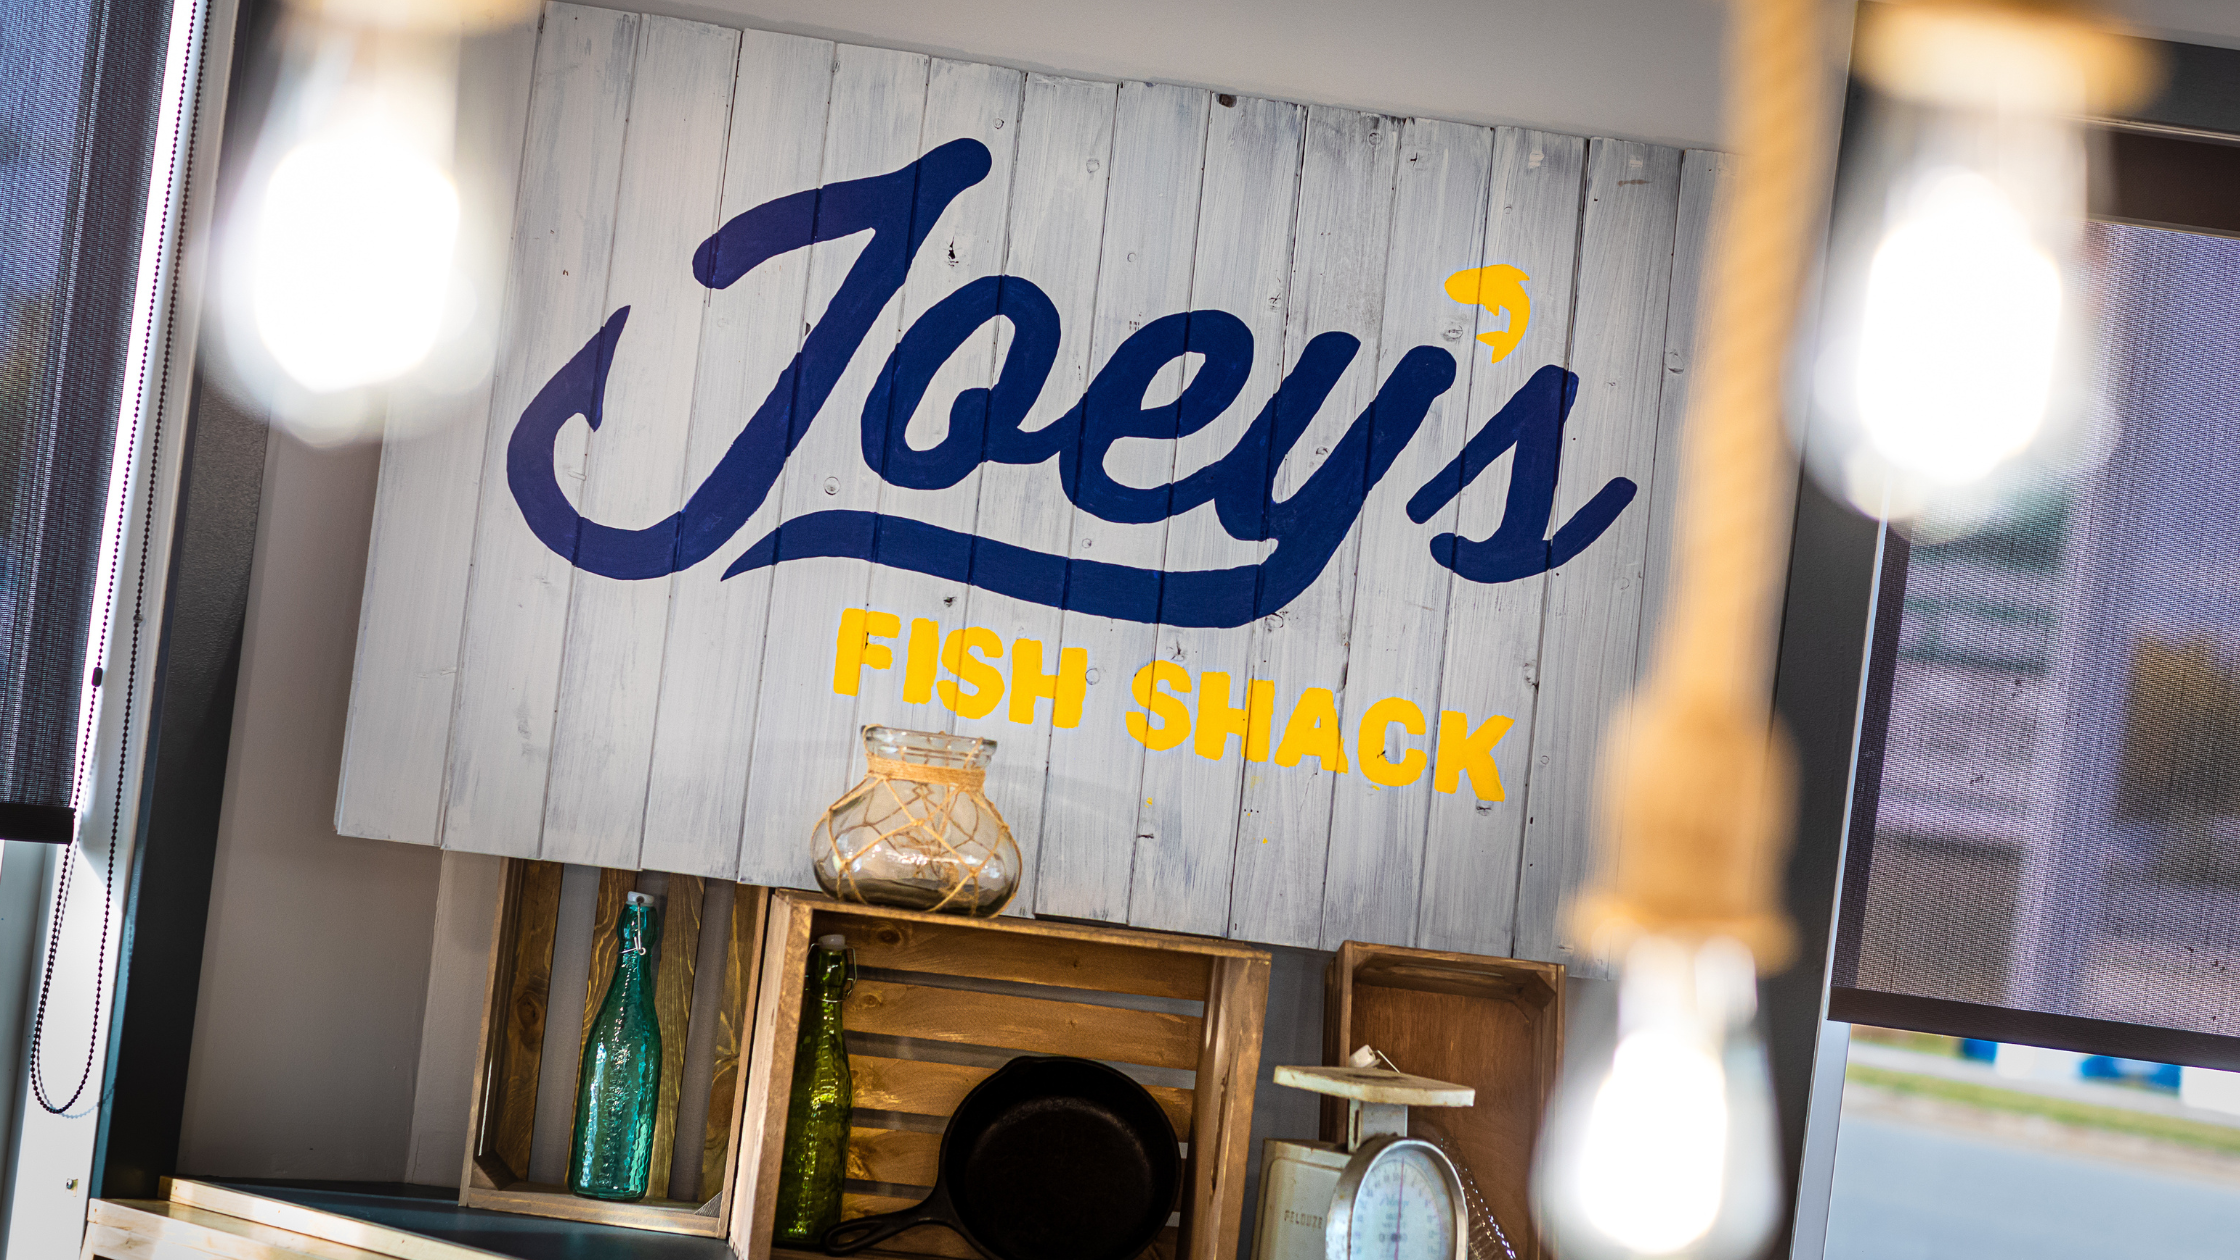 Joey's Seafood transitioned to Joey's Fish Shack